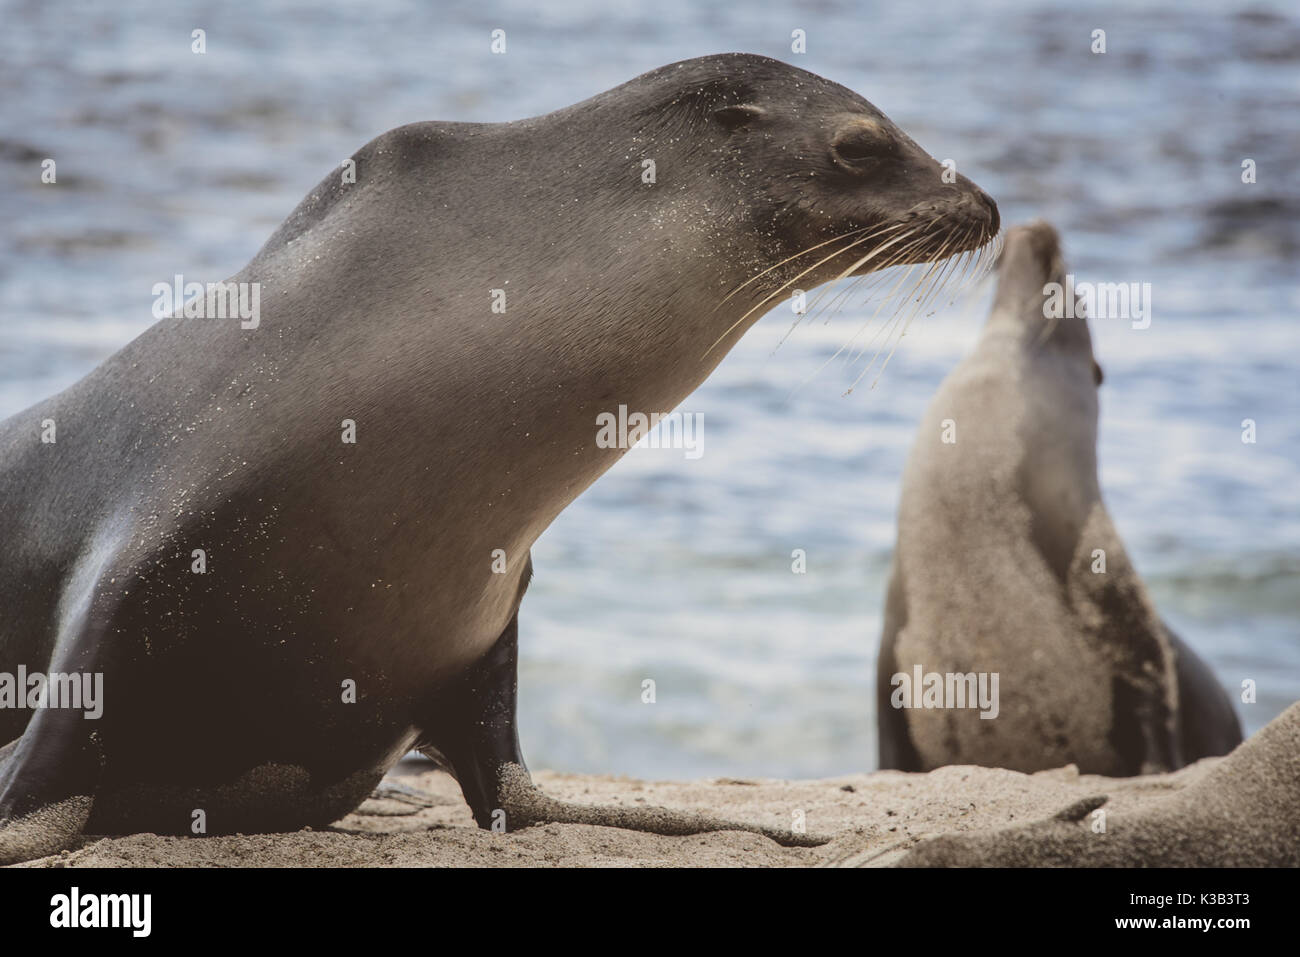 Sea Lions posing / waddling on the Galapgos islands Stock Photo